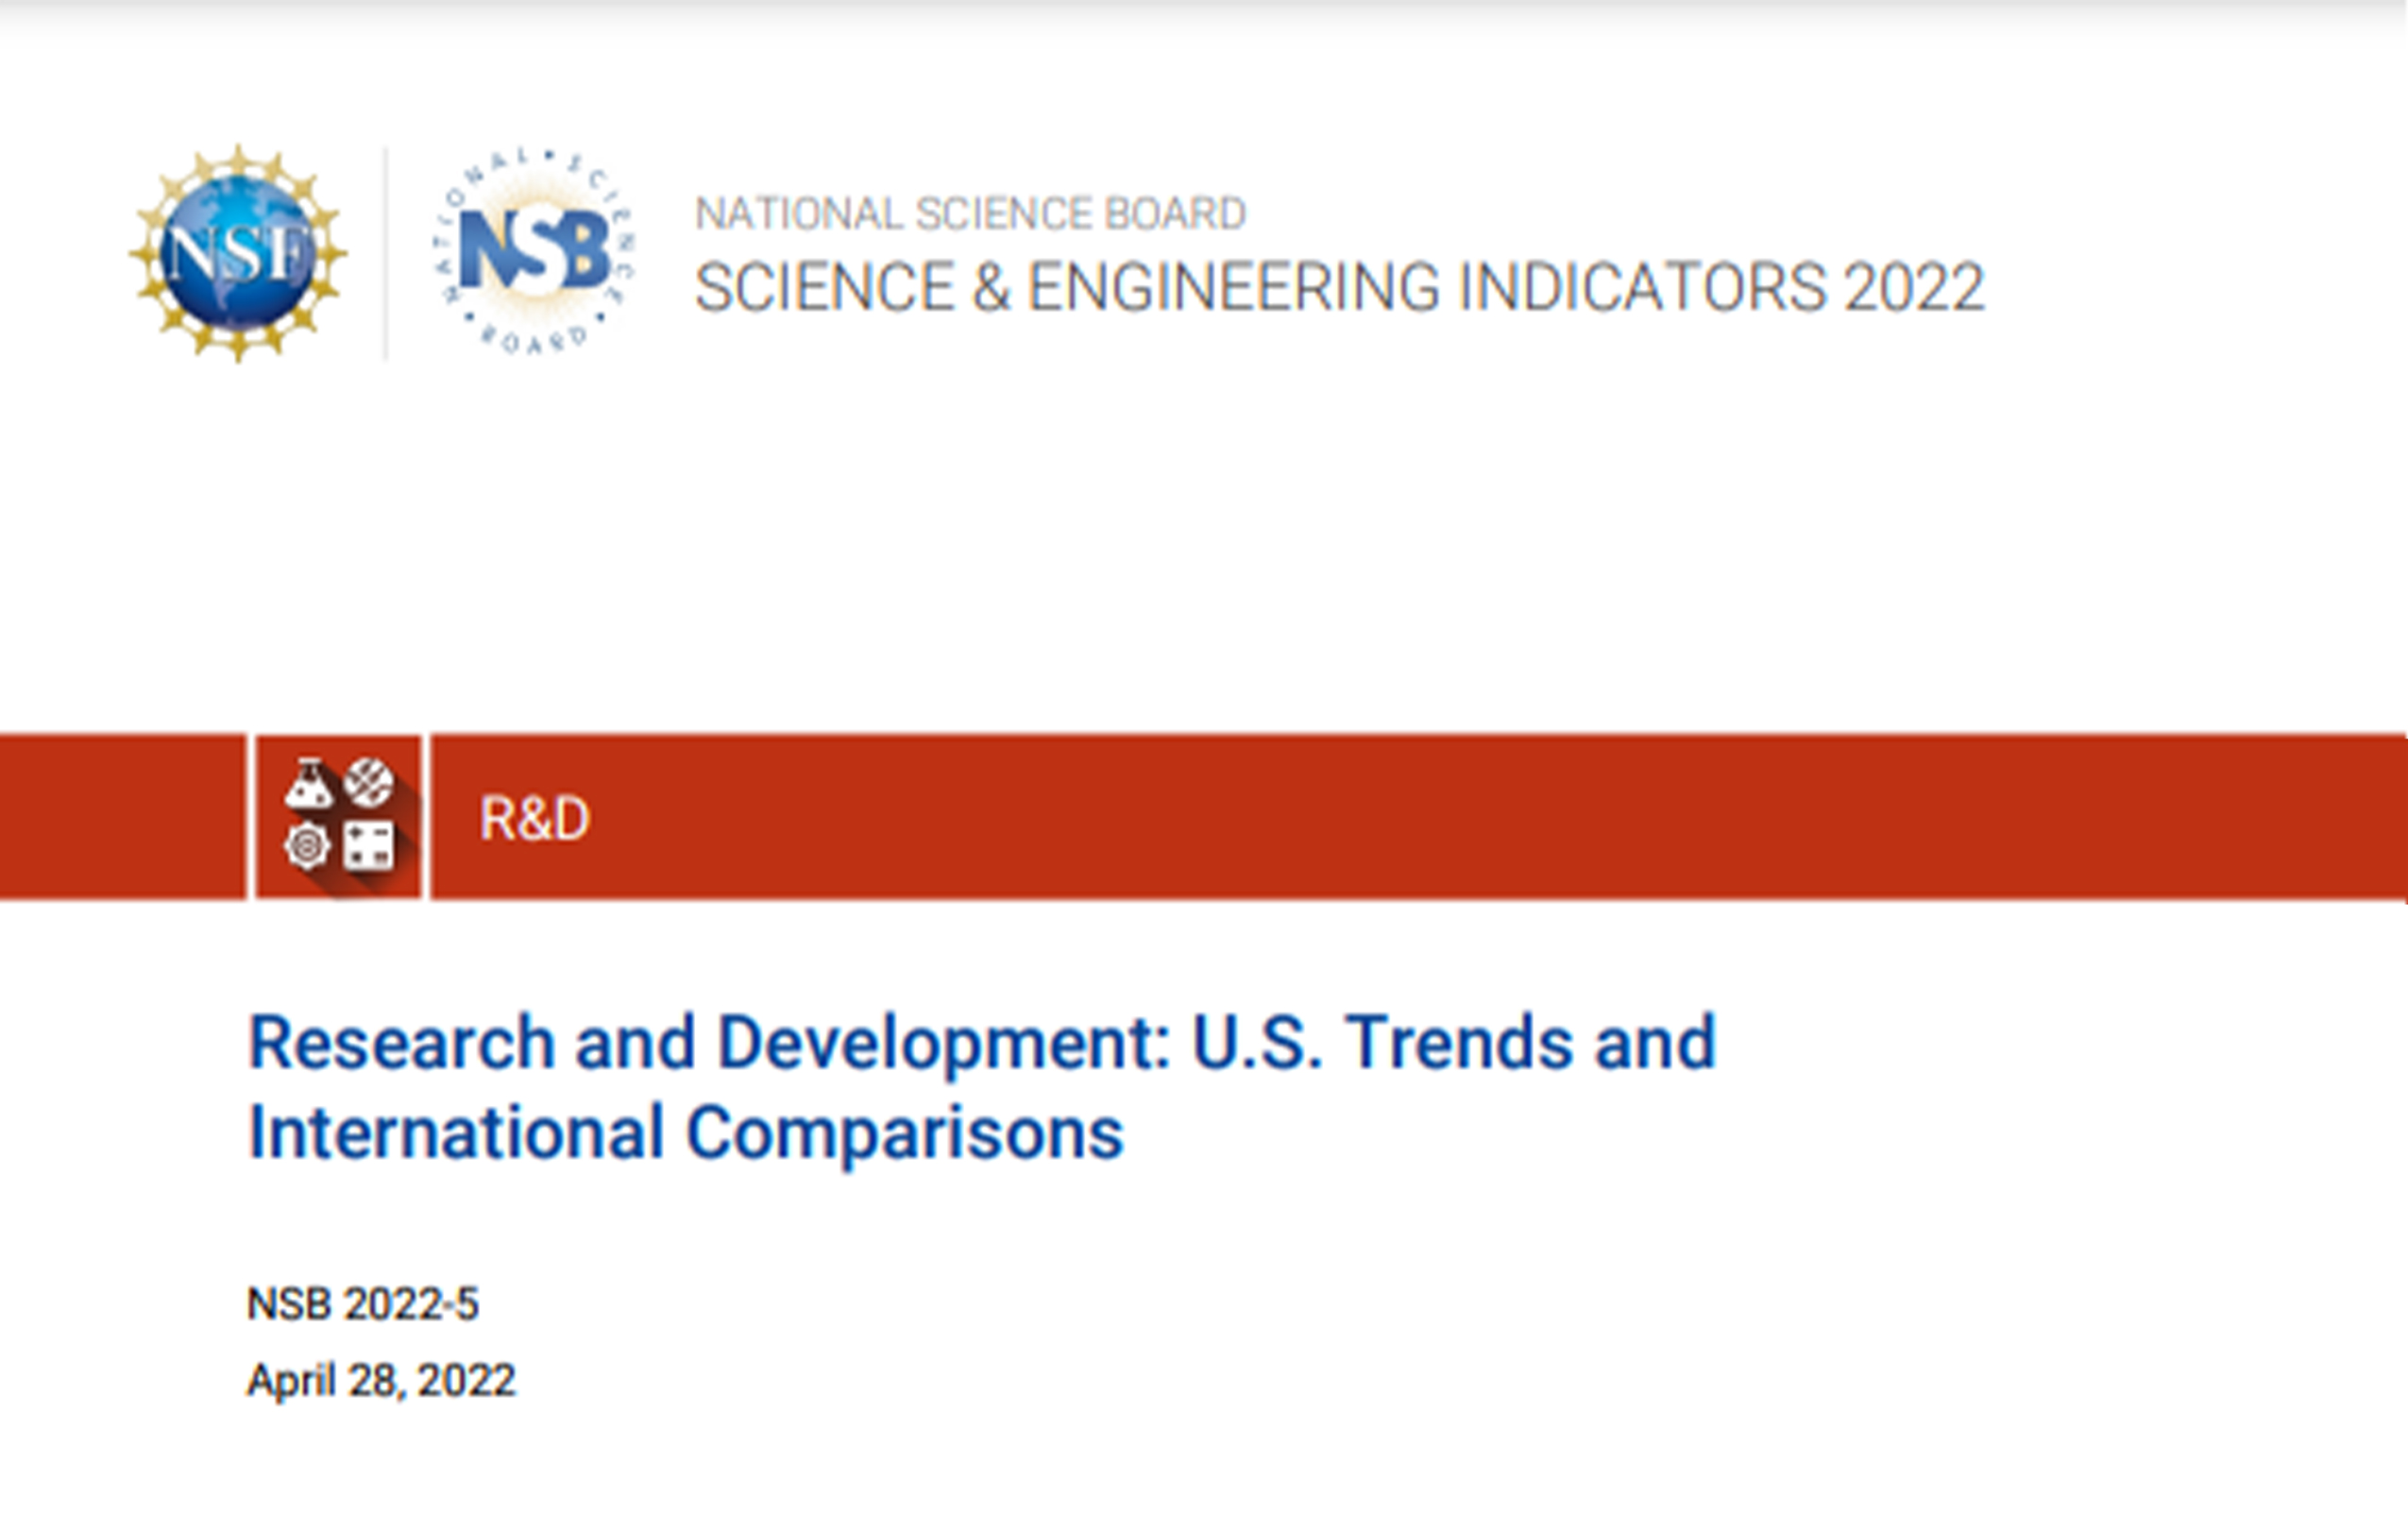 Research and Development: U.S. Trends and International Comparisons